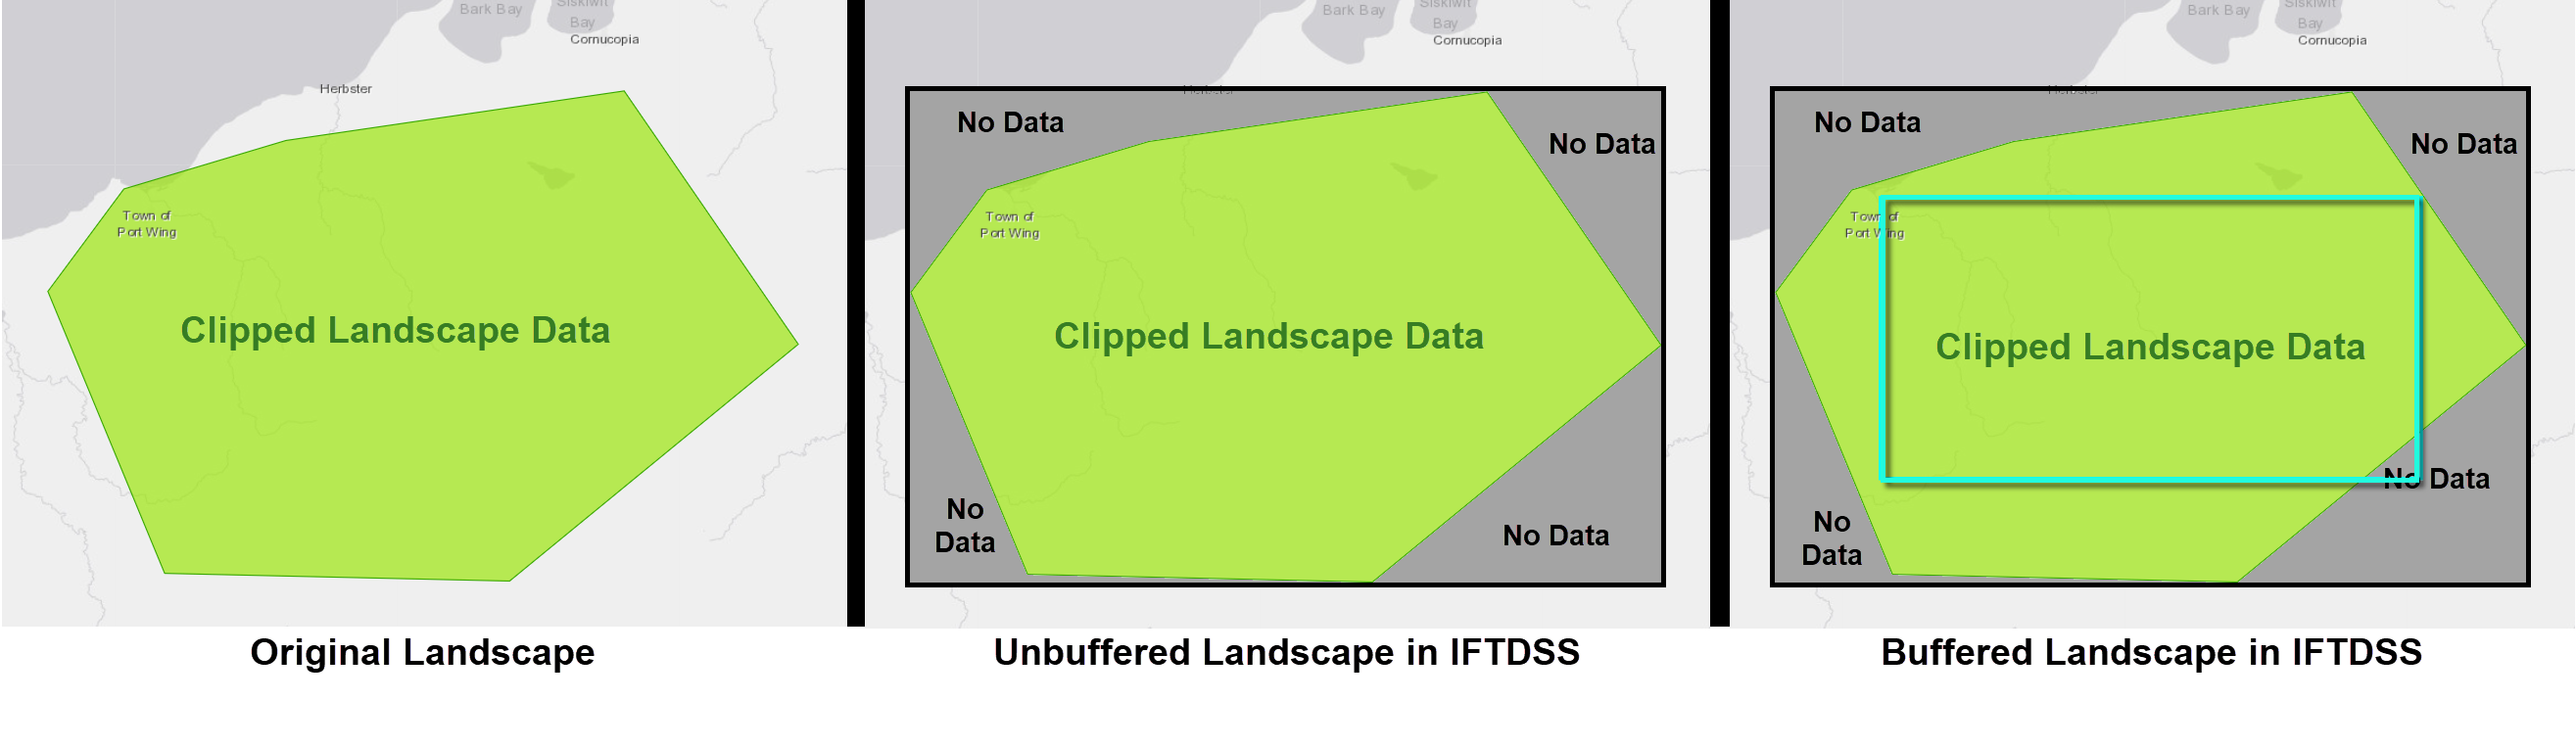 All Landscapes in IFTDSS are rectangular extent